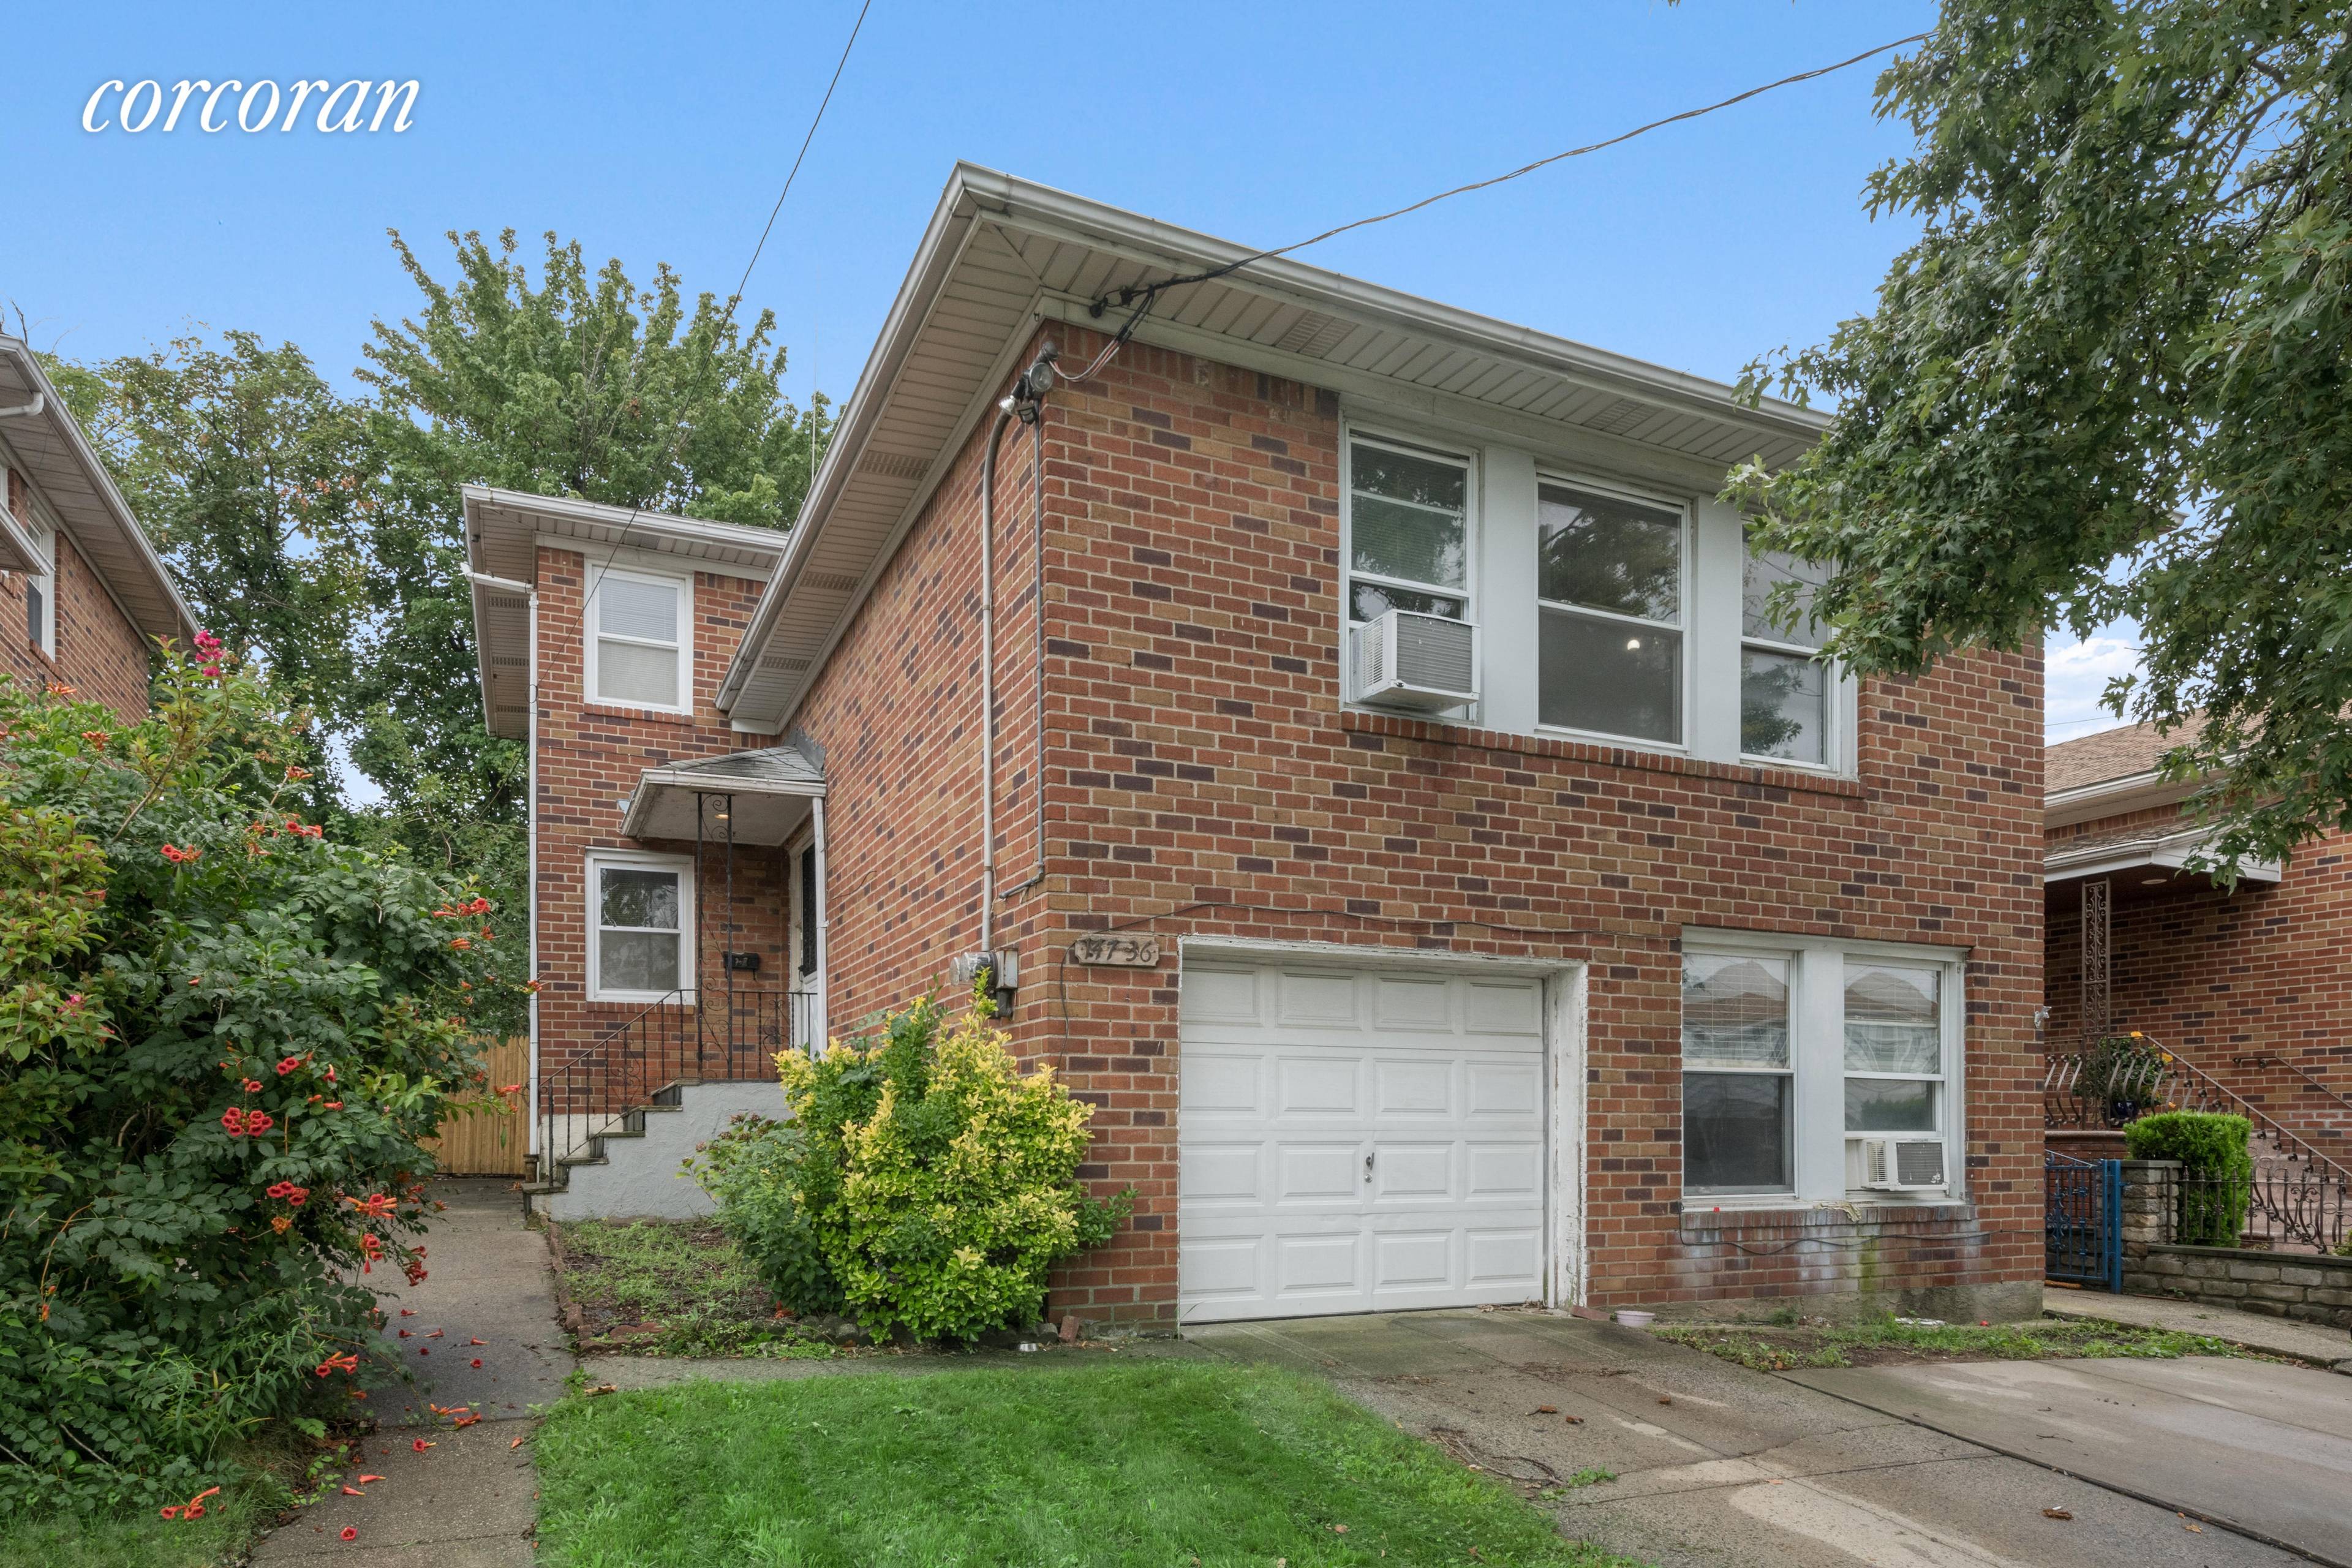 147 36 28th Avenue is a Fully Detached Two Family Home sitting on a 42x94 lot and ready for you to make your own !